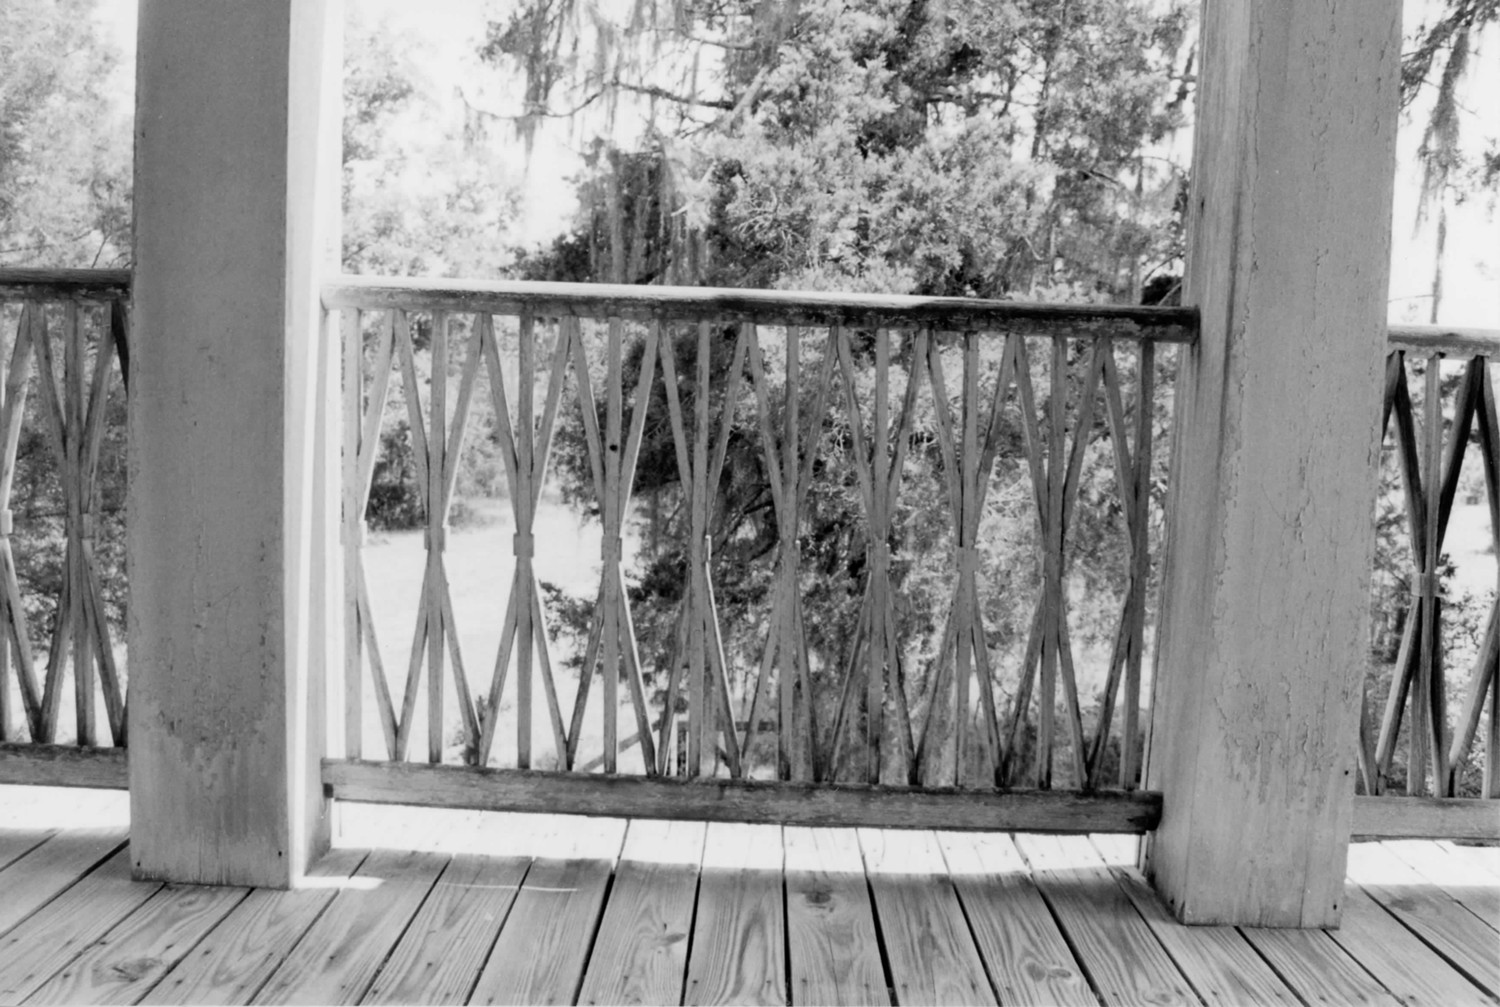 Dry Forks Plantation - James Asbury Tait House, Coy Alabama Second story front porch railings facing south (1998)